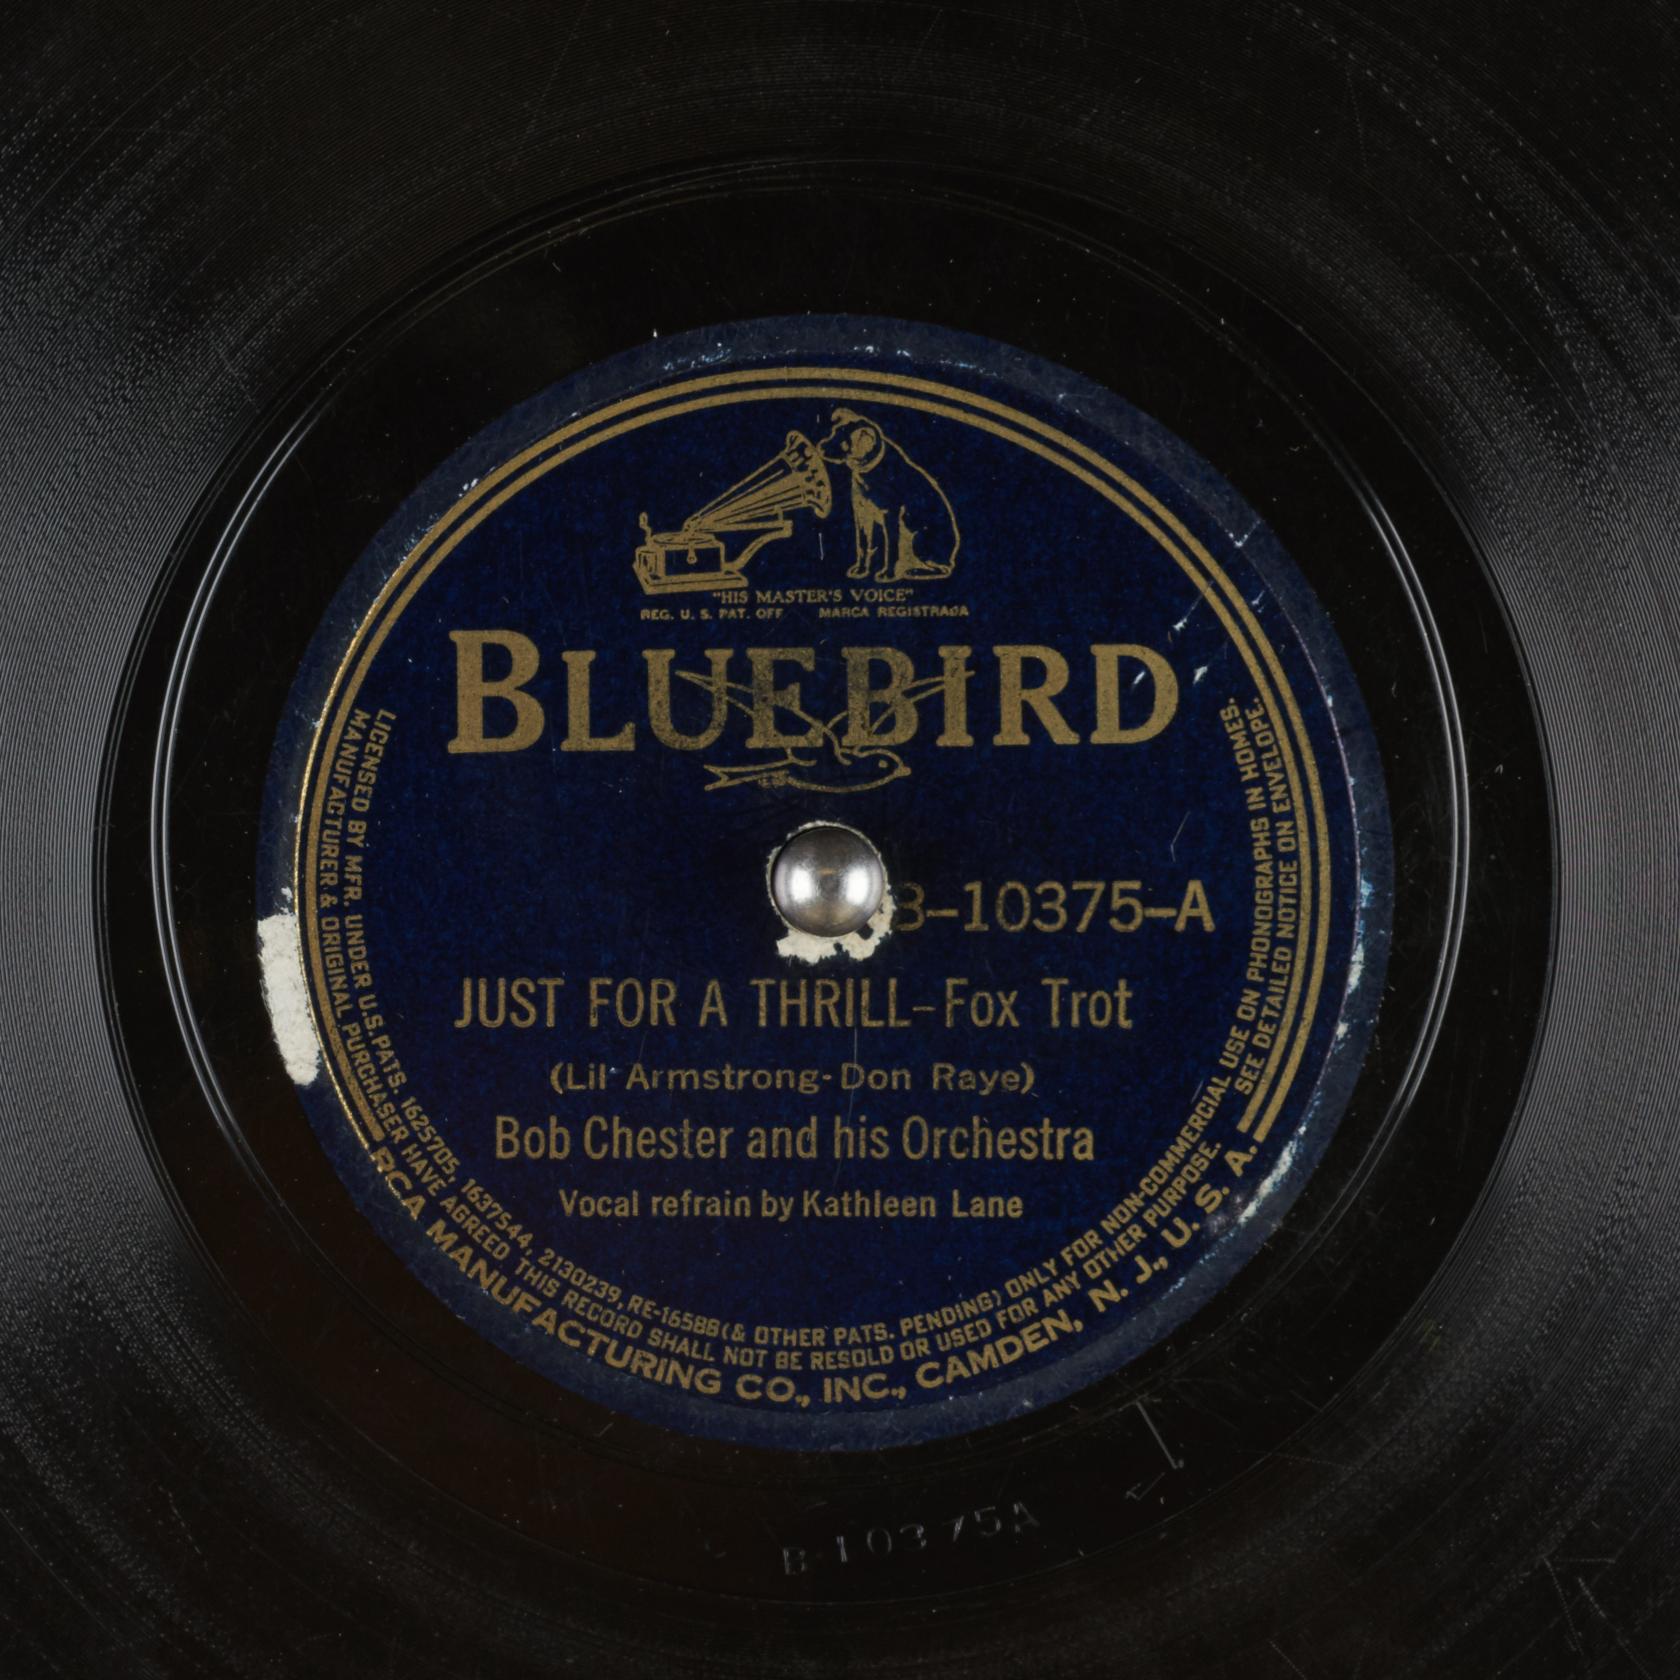 Just For A Thrill 78 rpm